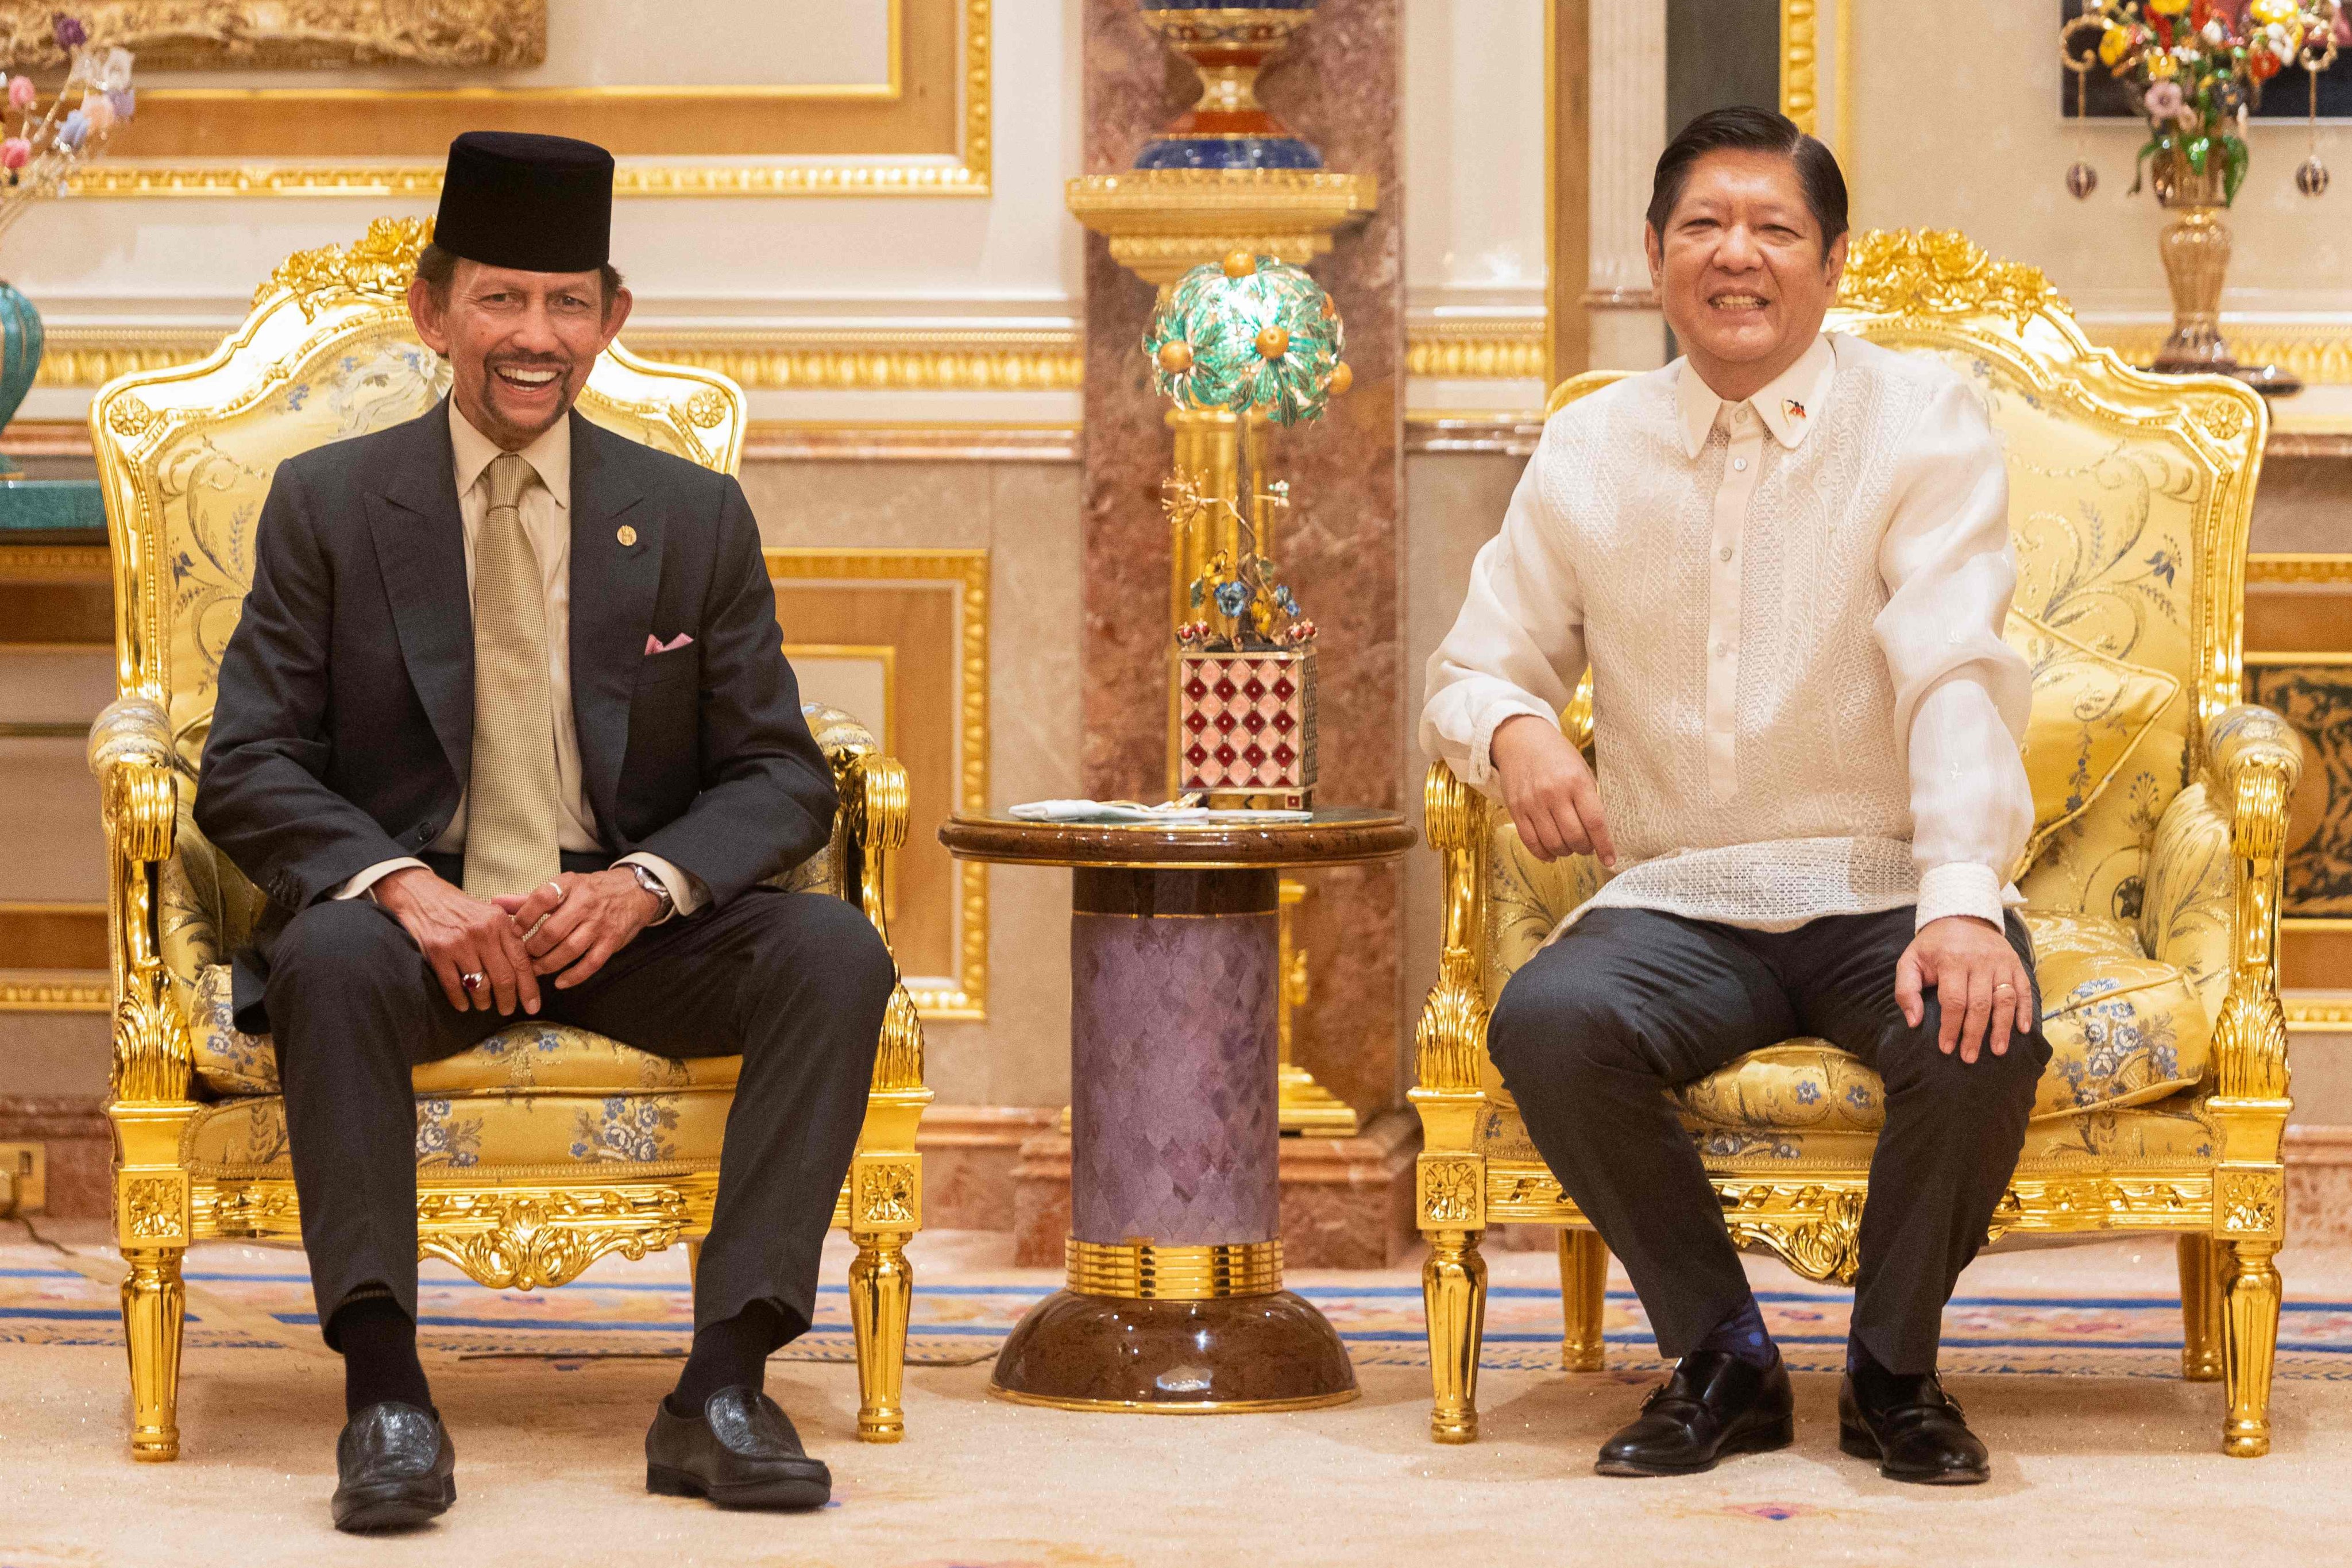 Brunei’s Sultan Hassanal Bolkiah (left) with Philippines’ President Ferdinand Marcos Jnr prior to a meeting at Istana Nurul Iman in Bandar Seri Begawan on Tuesday. Photo: AFP